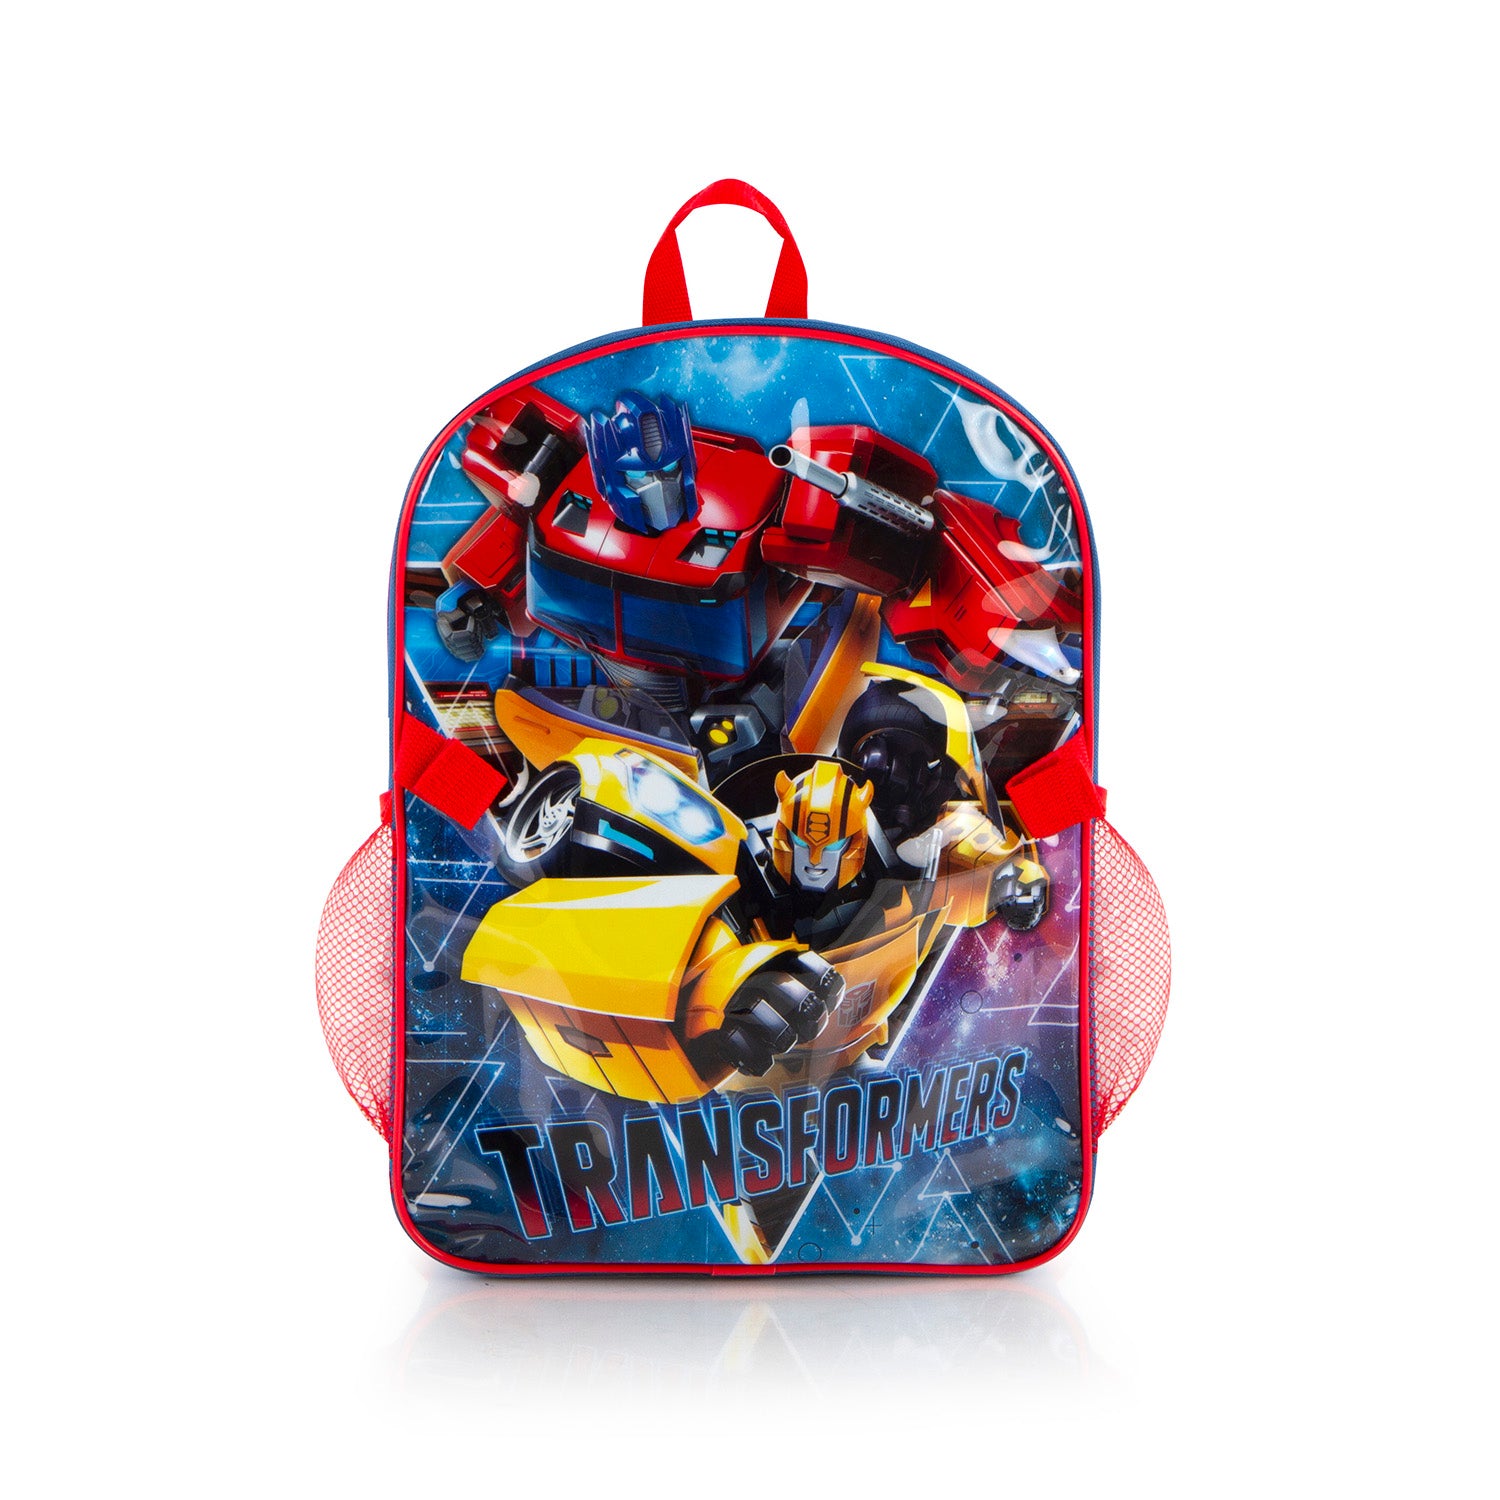 Transformers Deluxe Backpack and Lunch Bag Set